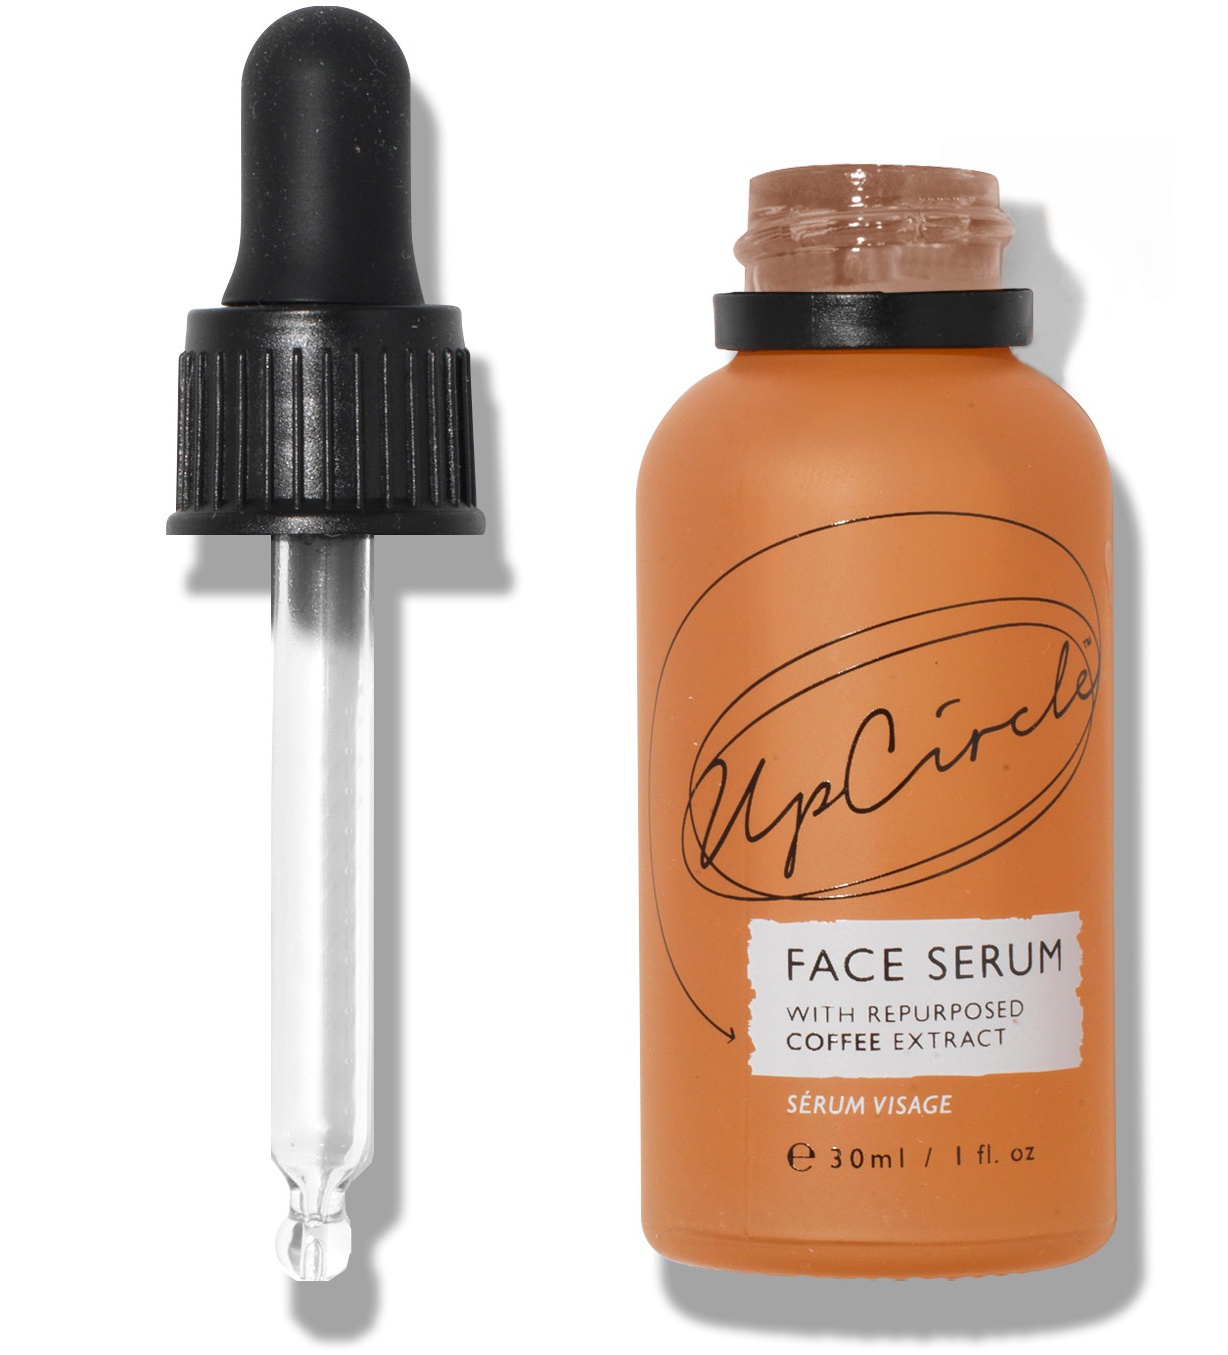 UpCircle Face Serum With Repurposed Coffee Extract